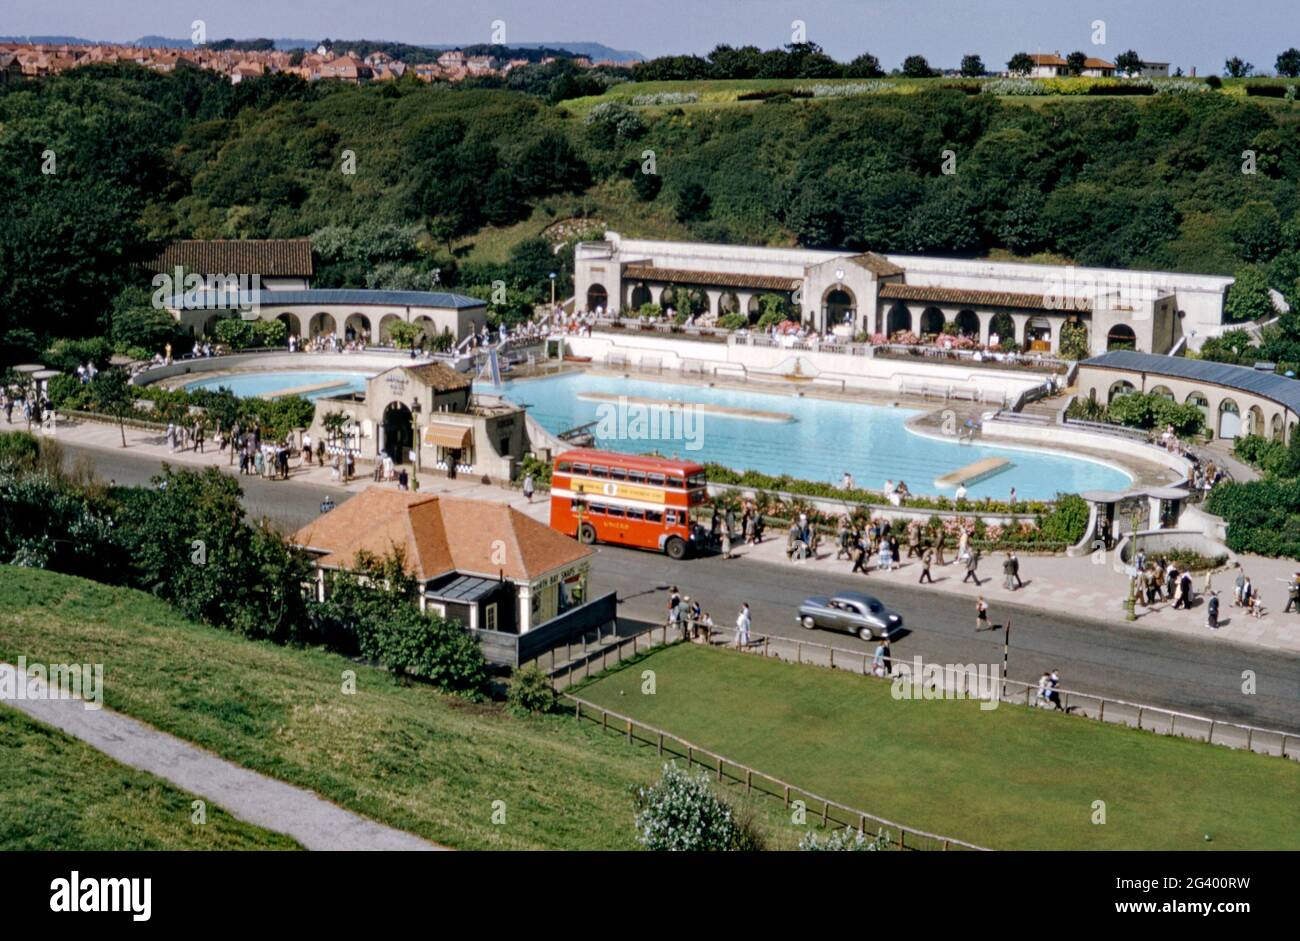 A view c. 1960 of the North Bay Bathing Pool, Peasholm Gap, Scarborough, East Yorkshire, England, UK was a popular attraction for swimmers at the seaside resort. The buildings are in a mediterranean style and a red ‘United’ bus is stopped outside. Previously a boating lake, it was remodelled in 1938, with accommodation for swimmers, sunbathers and seating for spectators. The North Bay Bathing Pool later became Waterscene, which boasting the longest water chute in the world in 1984. It closed in 2007 and was demolished to make way for apartments. This image is from an old vintage transparency. Stock Photo